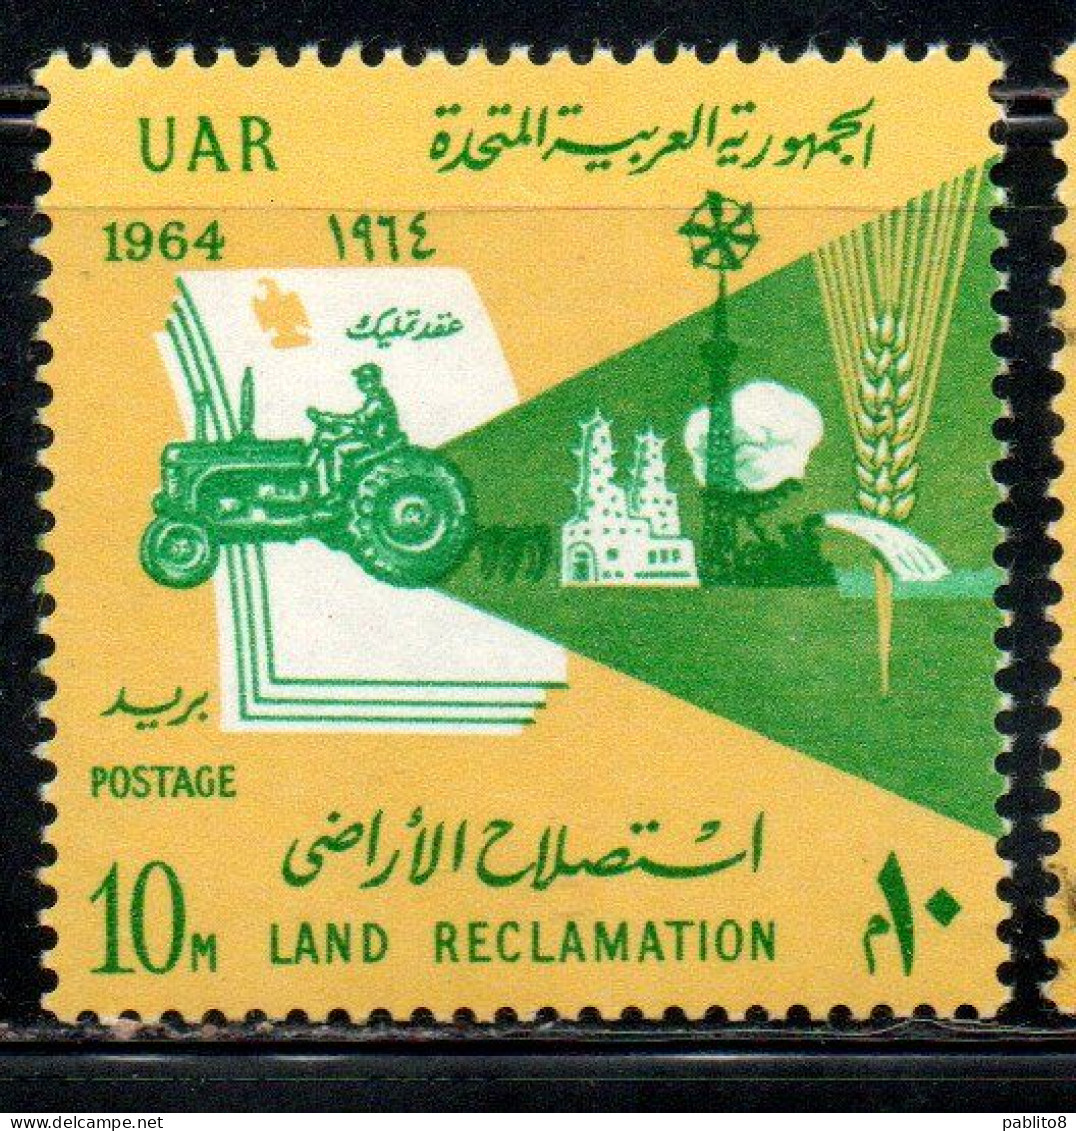 UAR EGYPT EGITTO 1964 ELECTRICITY ASWAN HIGH DAM HYDROELICTRIC POWER STATION LAND RECLAMATION 10m  MNH - Unused Stamps